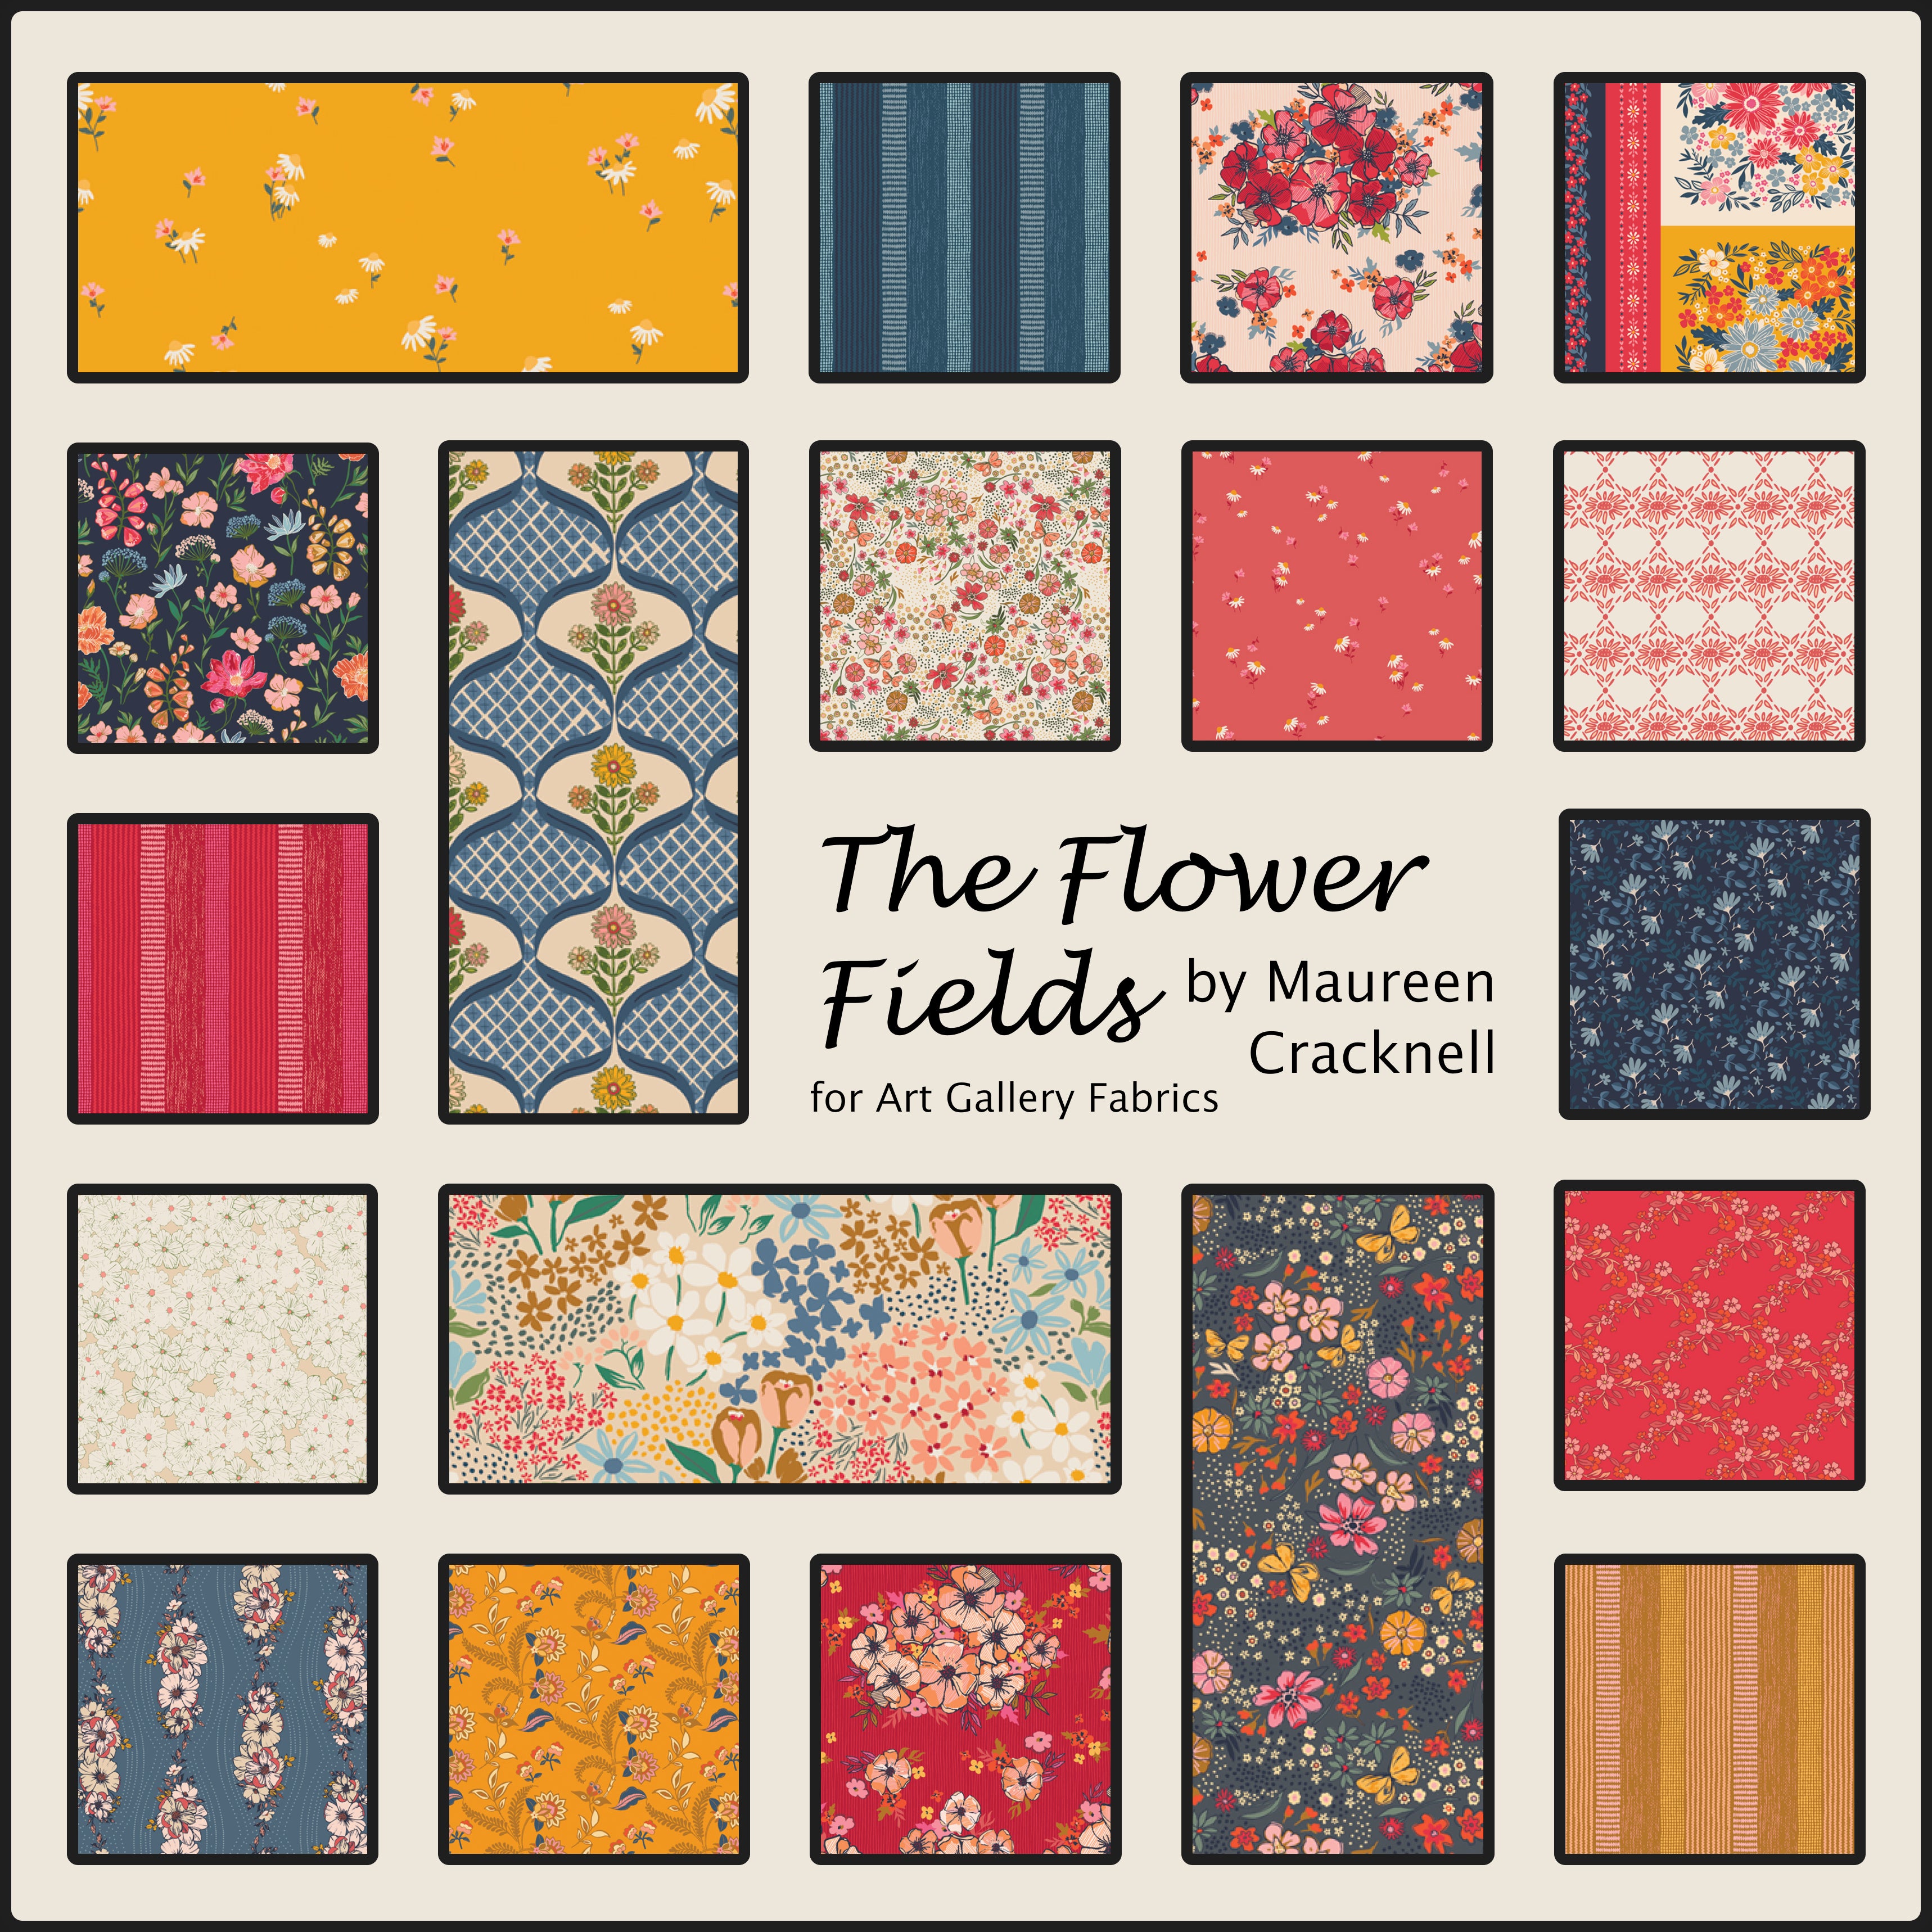 The Flower Fields by Maureen Cracknell - Coming Soon!